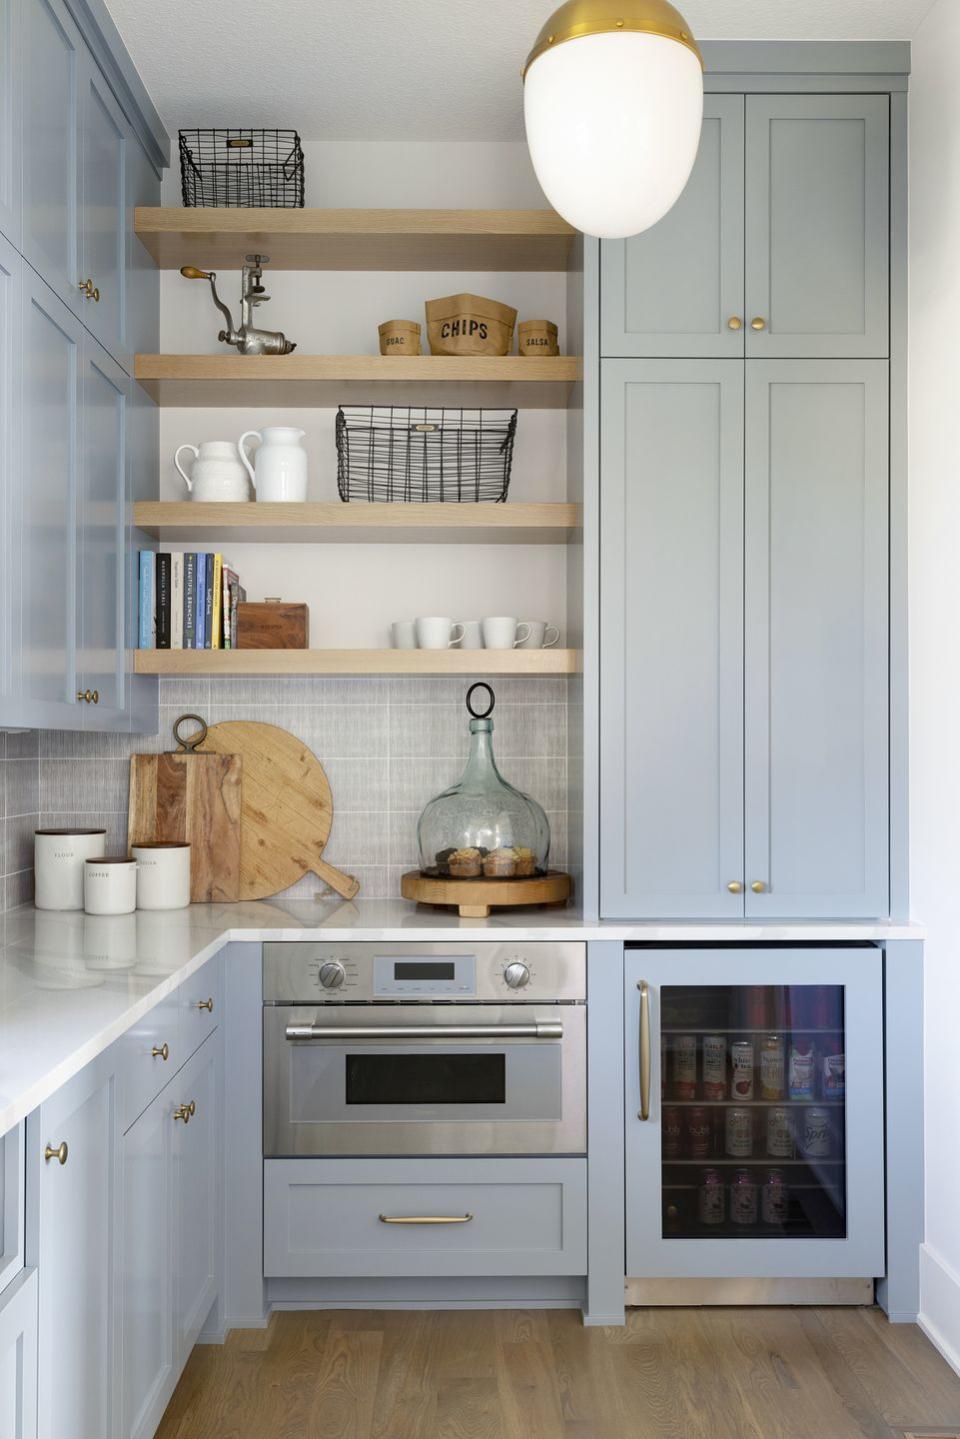 hottest design trend gorgeous blue butler's pantry